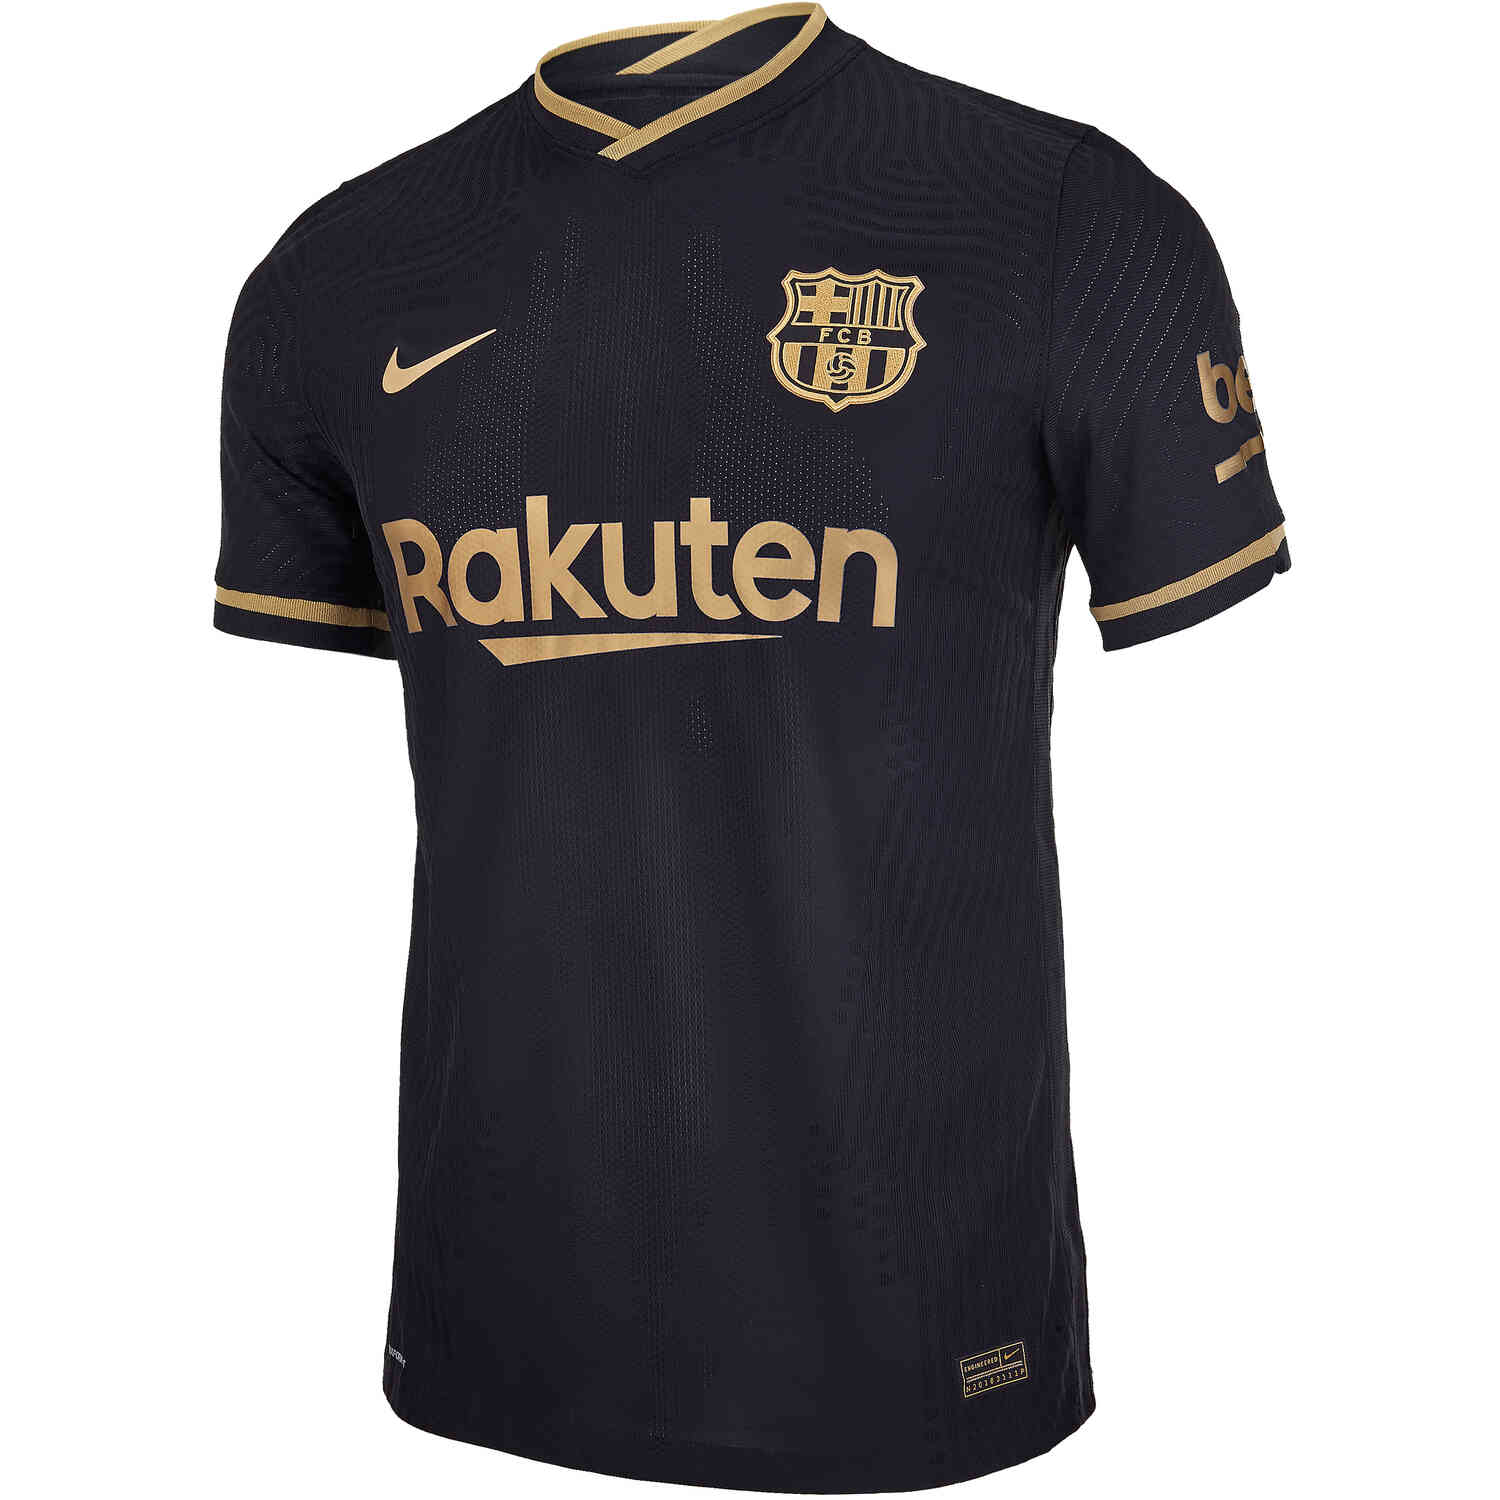 Buy > fc barcelona away jersey 2021 authentic > in stock